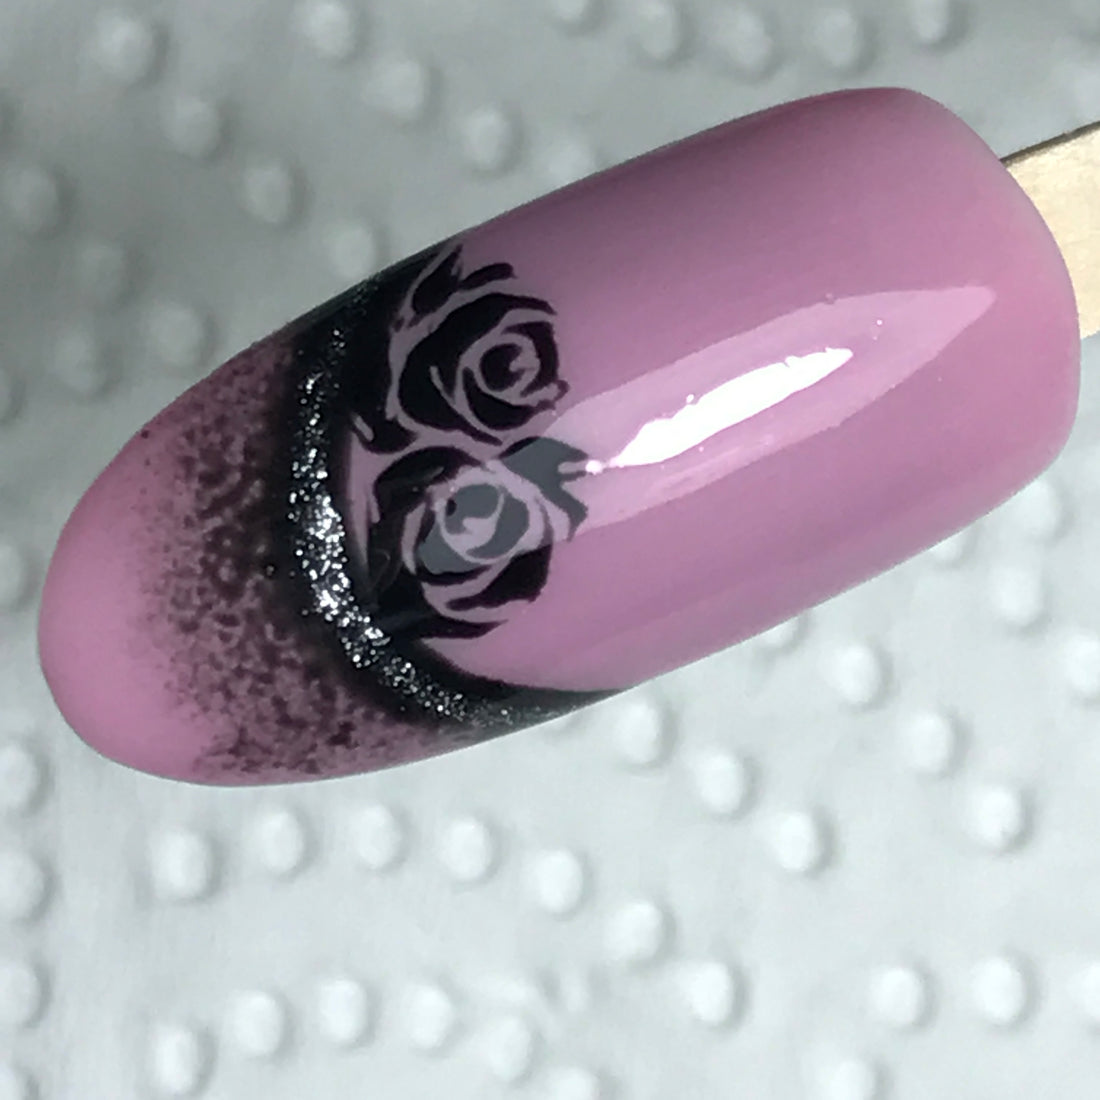 Freehand painting roses